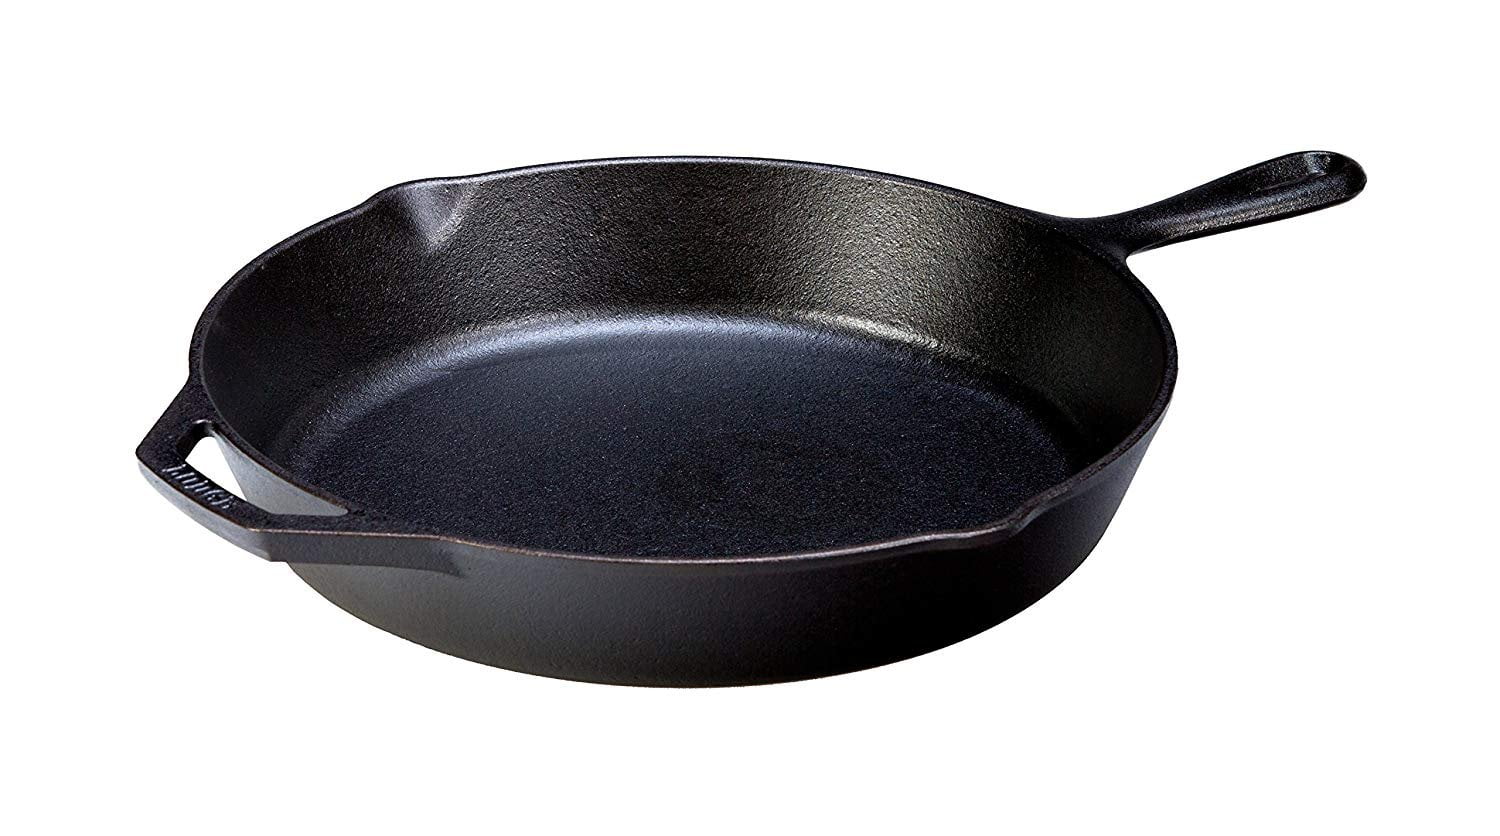 Lodge Cast Iron Skillet Review (Is It Any Good?) - Prudent Reviews